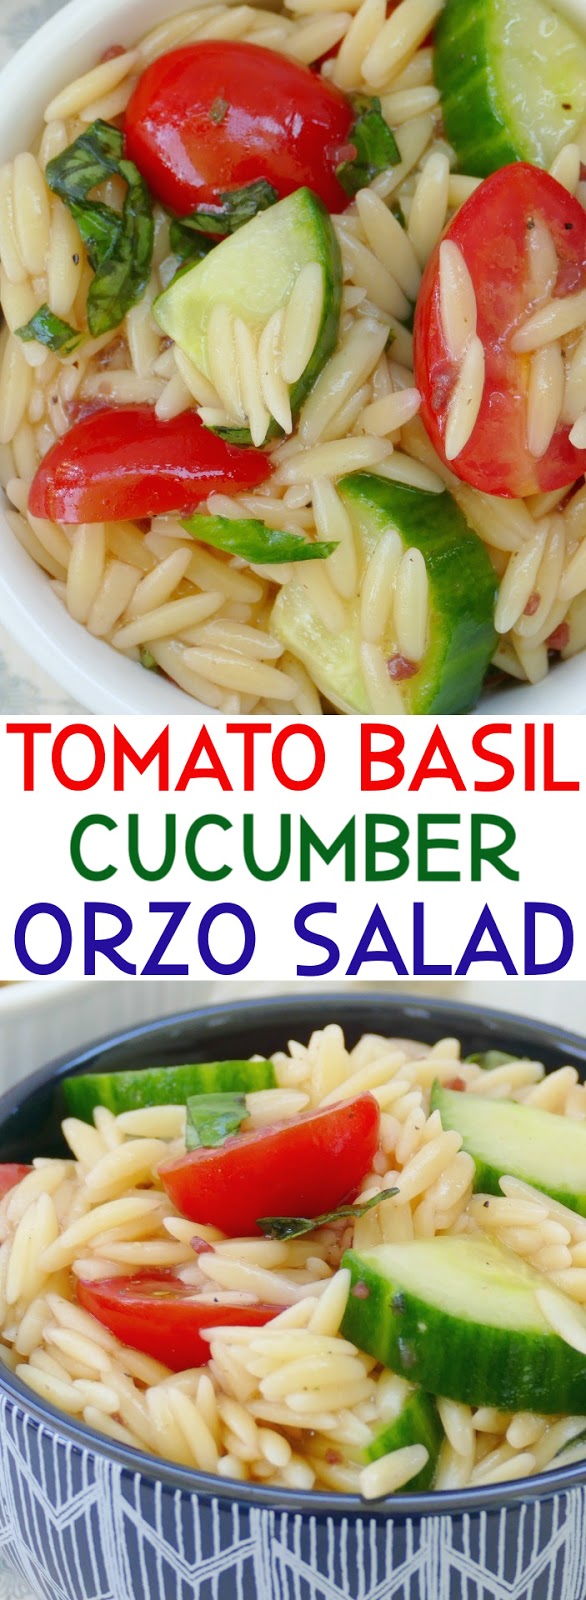 This simple spring or summer orzo pasta salad couldn't be any easier! The tomatoes, basil and cucumber combined together adds the perfect taste and texture to the orzo, and the vinaigrette dressing is the perfect finishing touch. Great side for lunch, dinner, any picnic, BBQ or potluck!